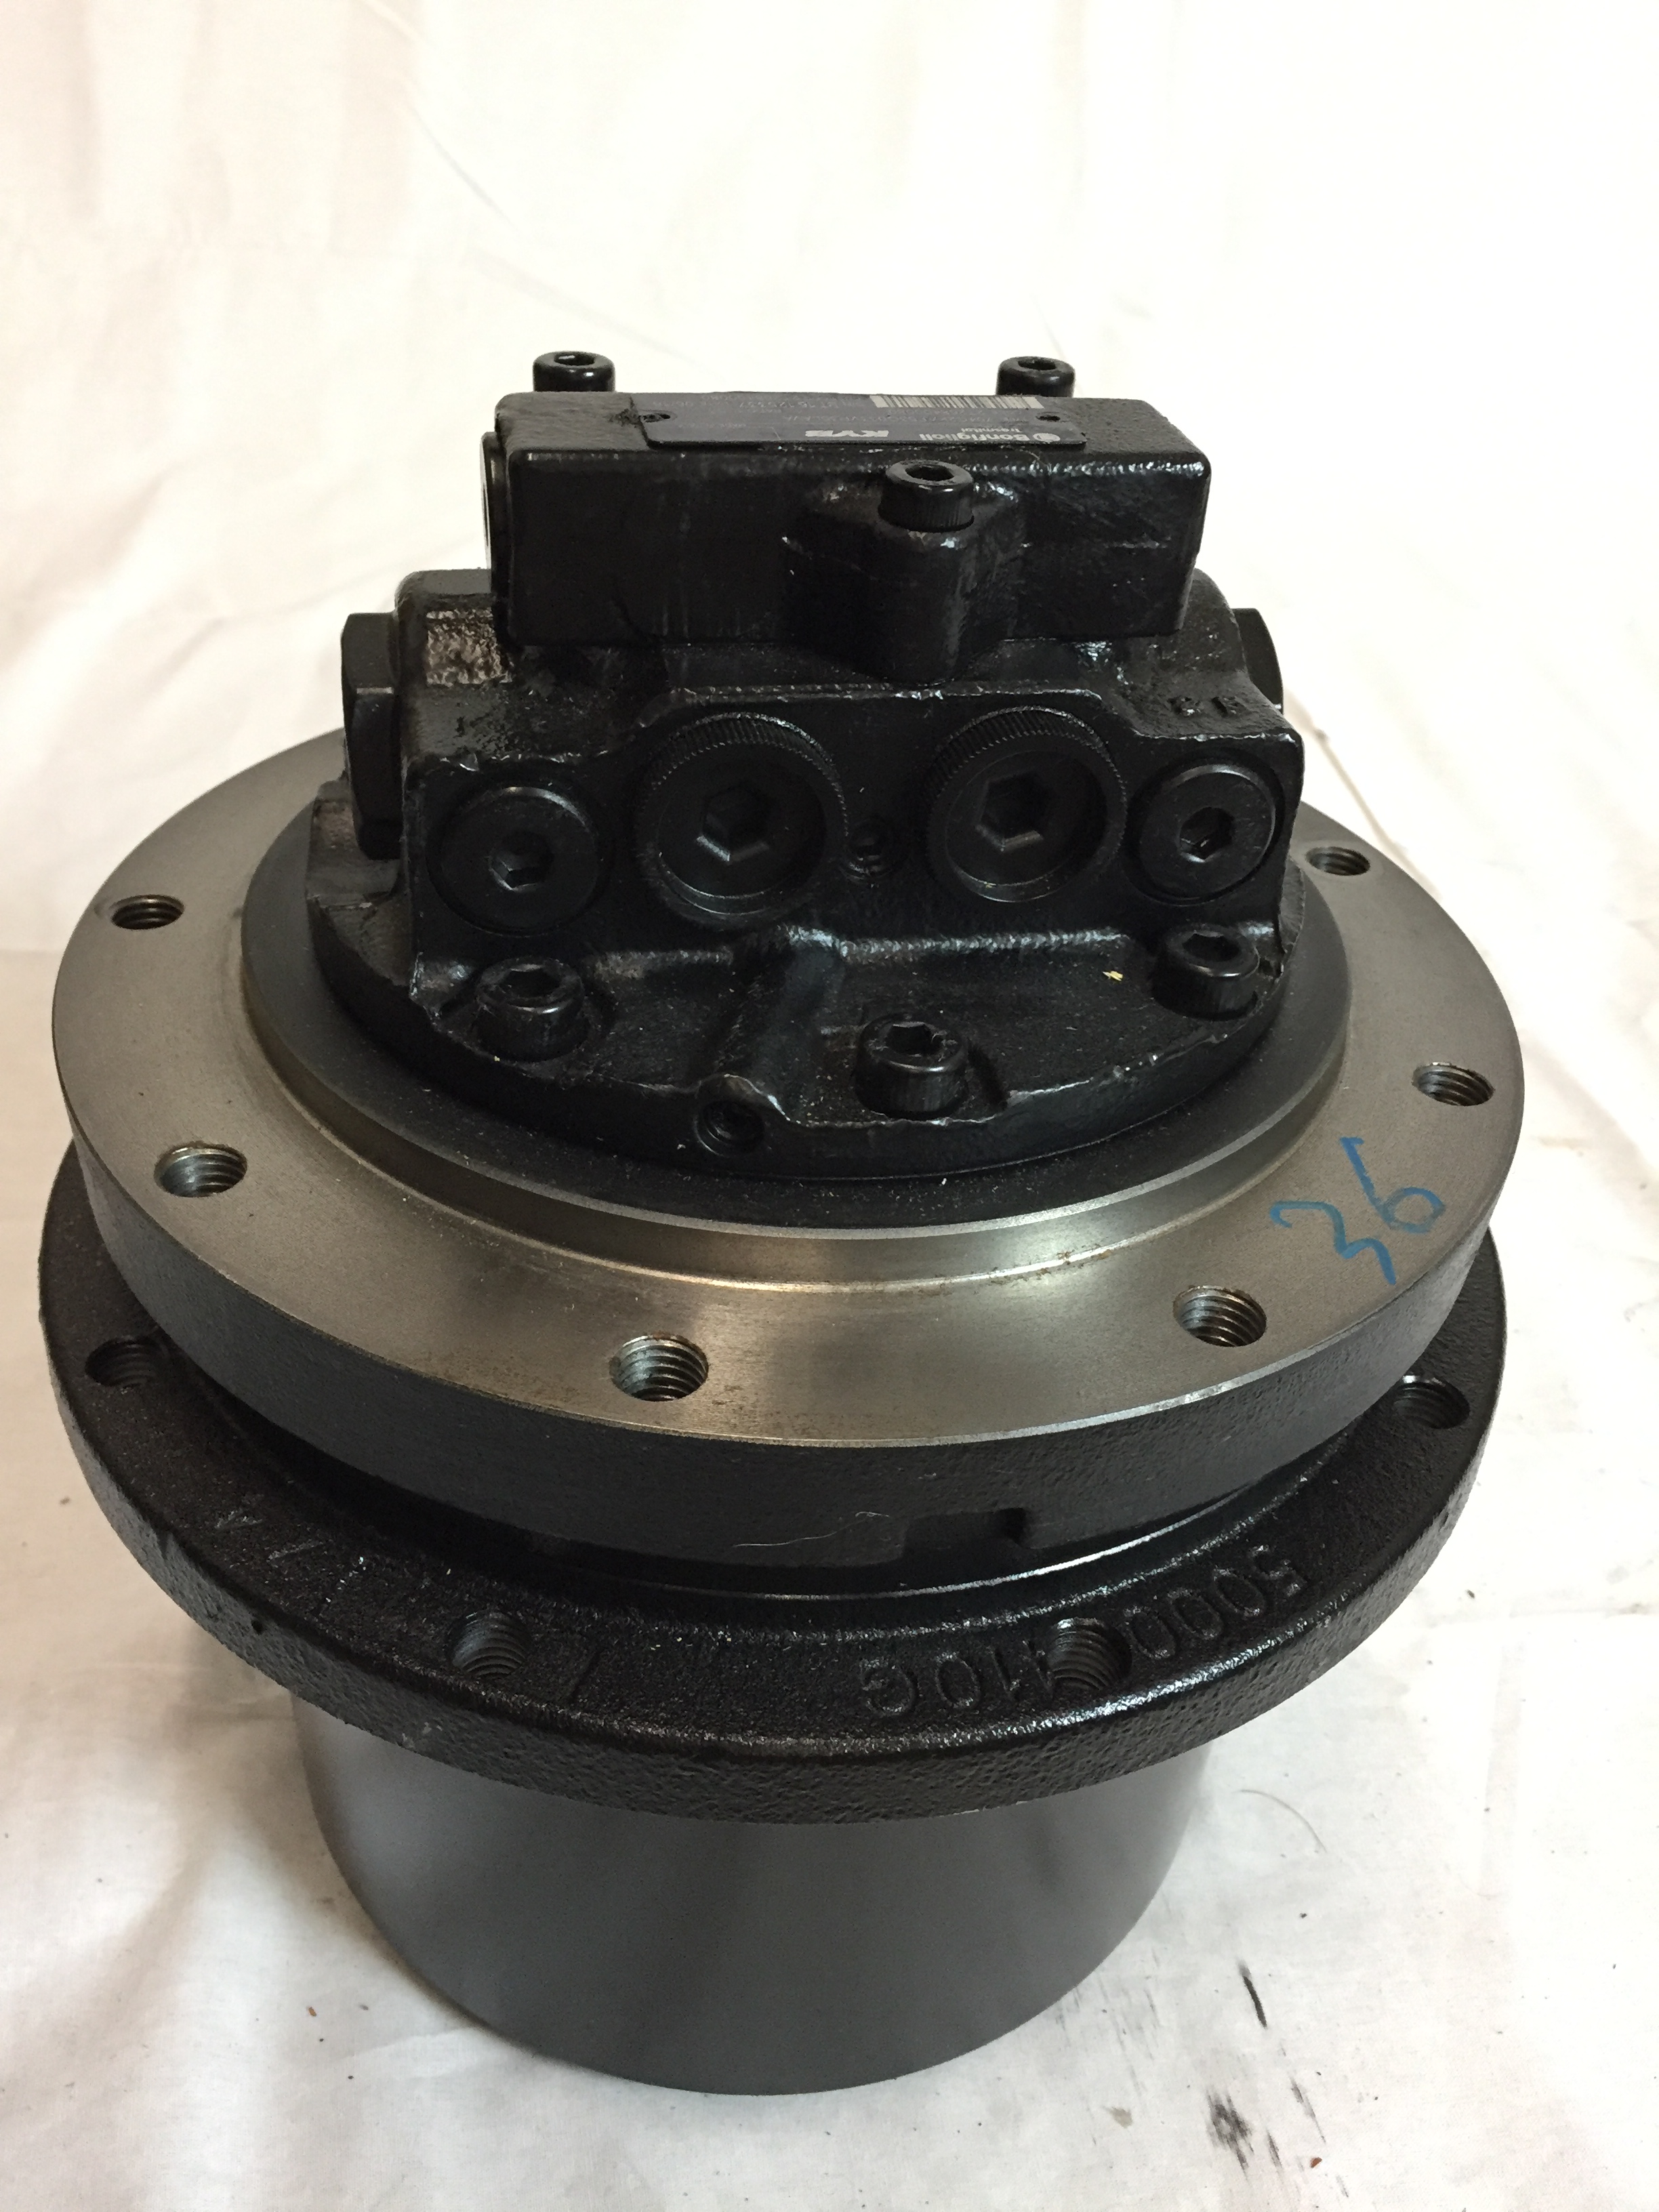 ZX50 Complete Final Drive (Planetary/Travel Drive) with Motor (LOW S/N 244001-274999) #4628892,0922101